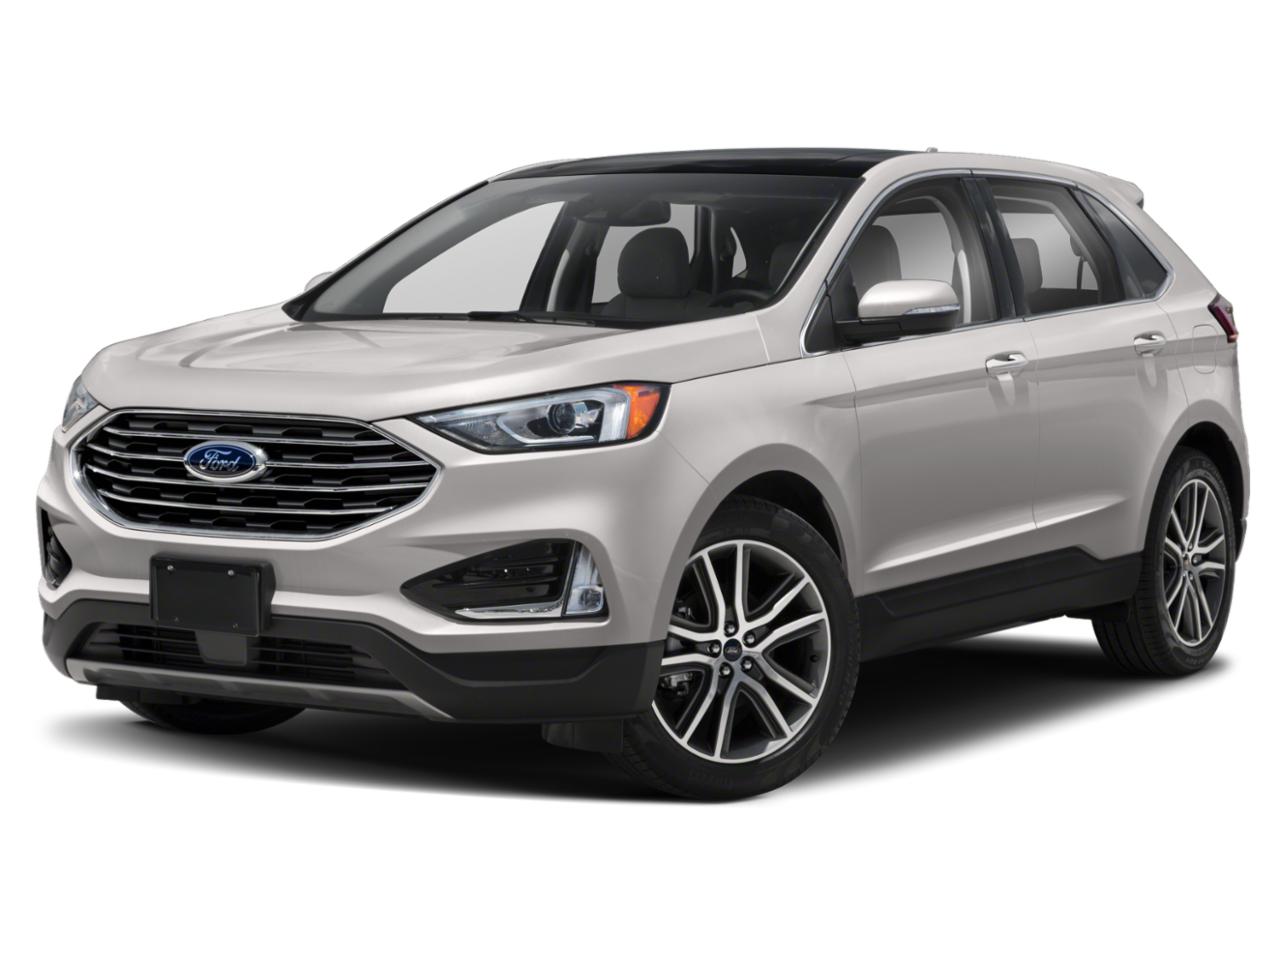 2020 Ford Edge Vehicle Photo in Willow Grove, PA 19090